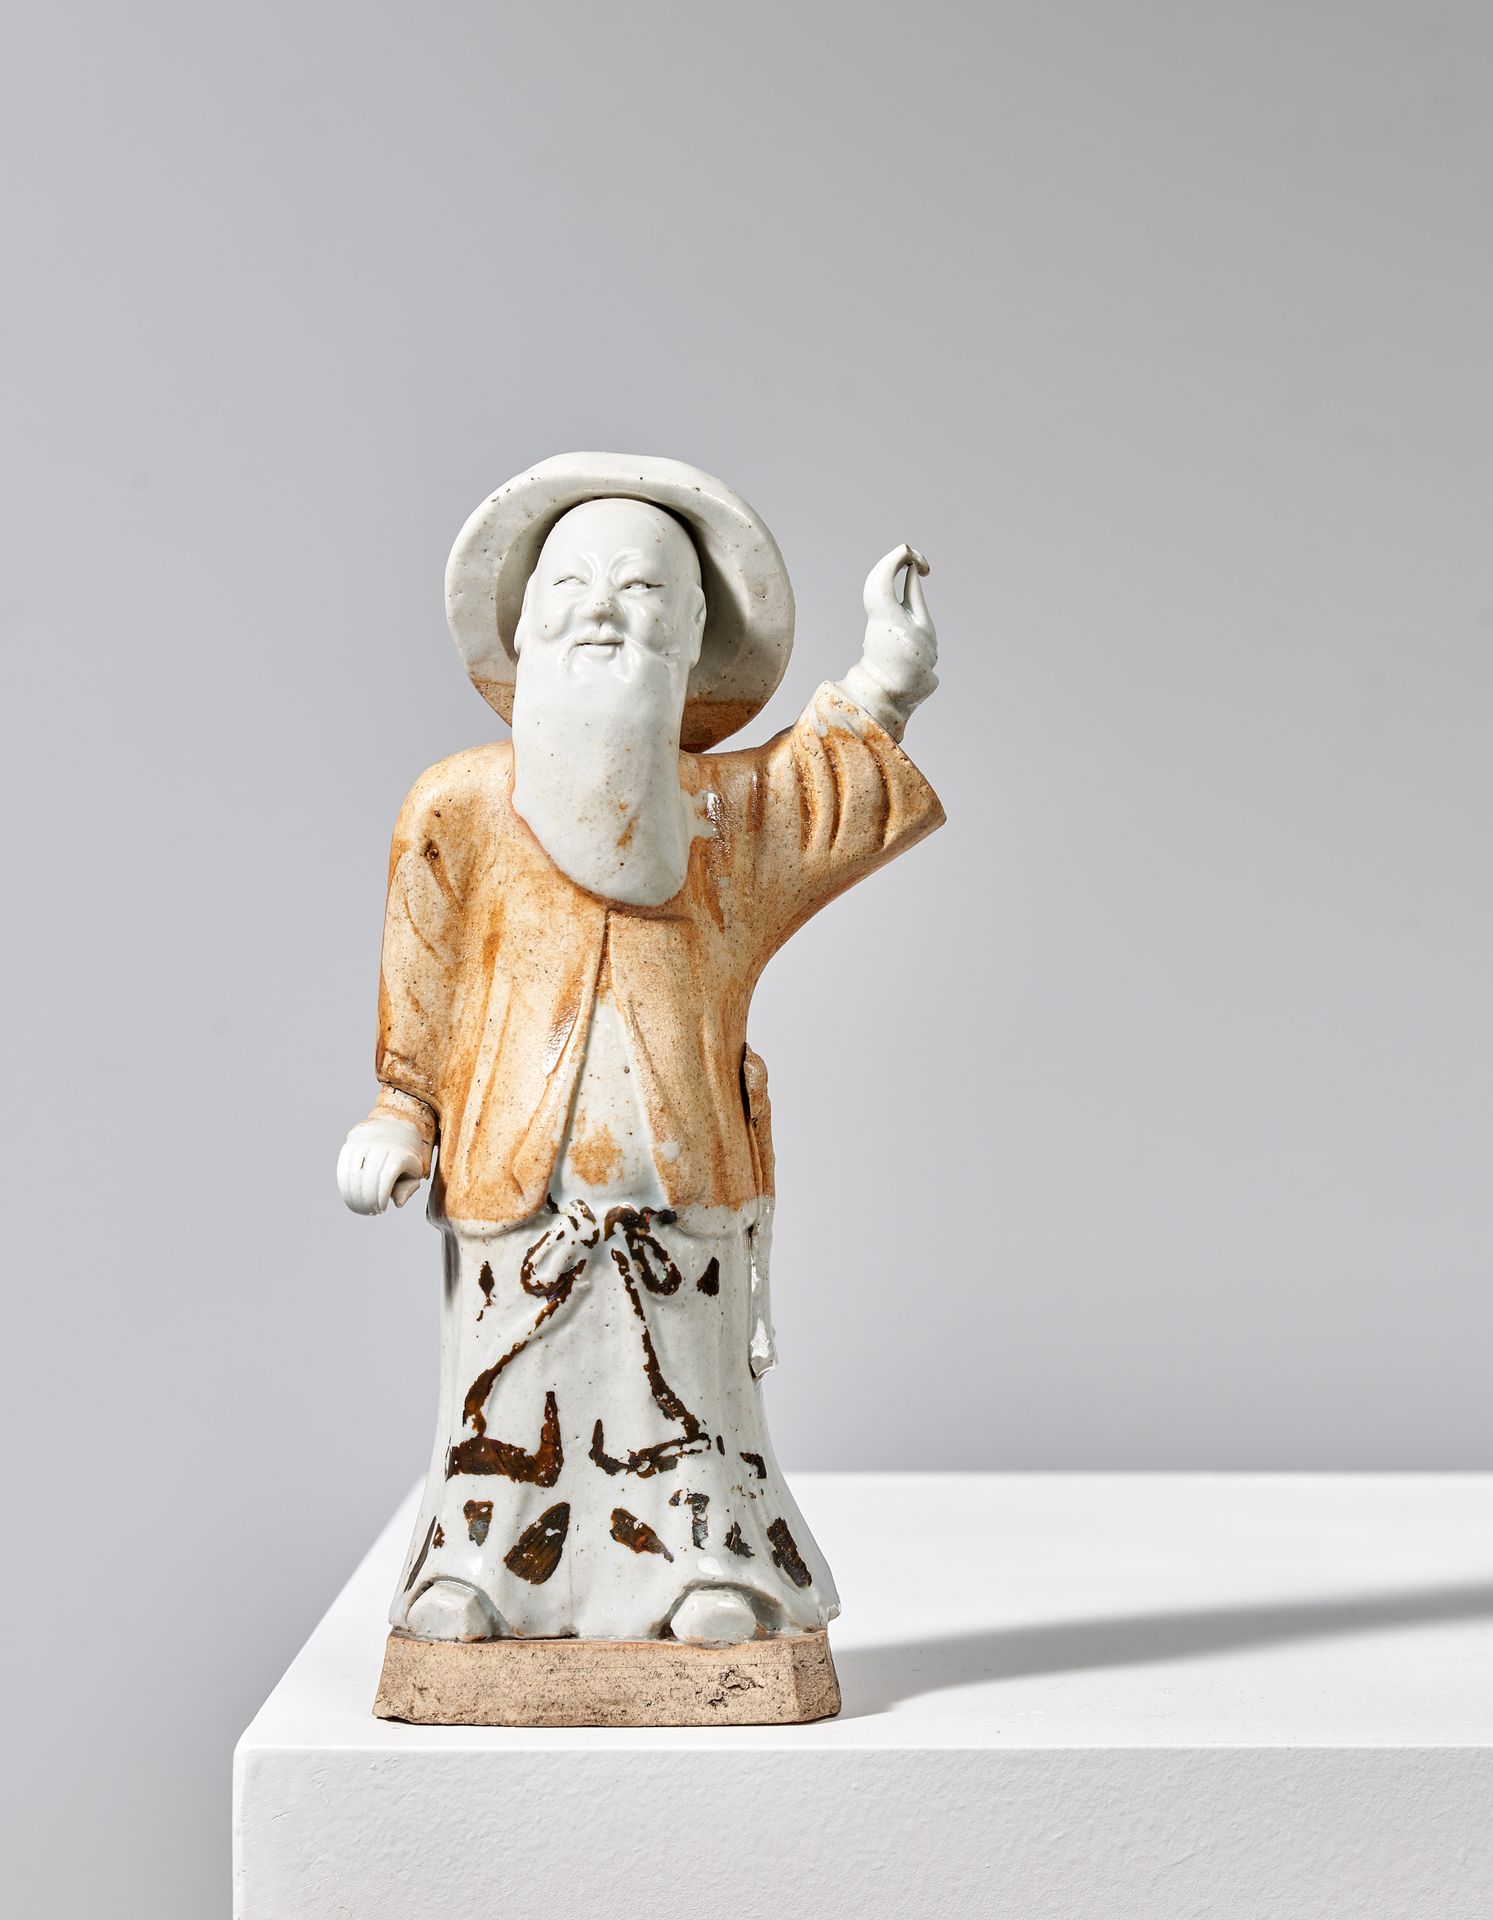 Null A GLAZED BISCUIT WEAR MODEL OF A WISEMAN

Qing Dynasty (1644-1911) 

H: 17,&hellip;